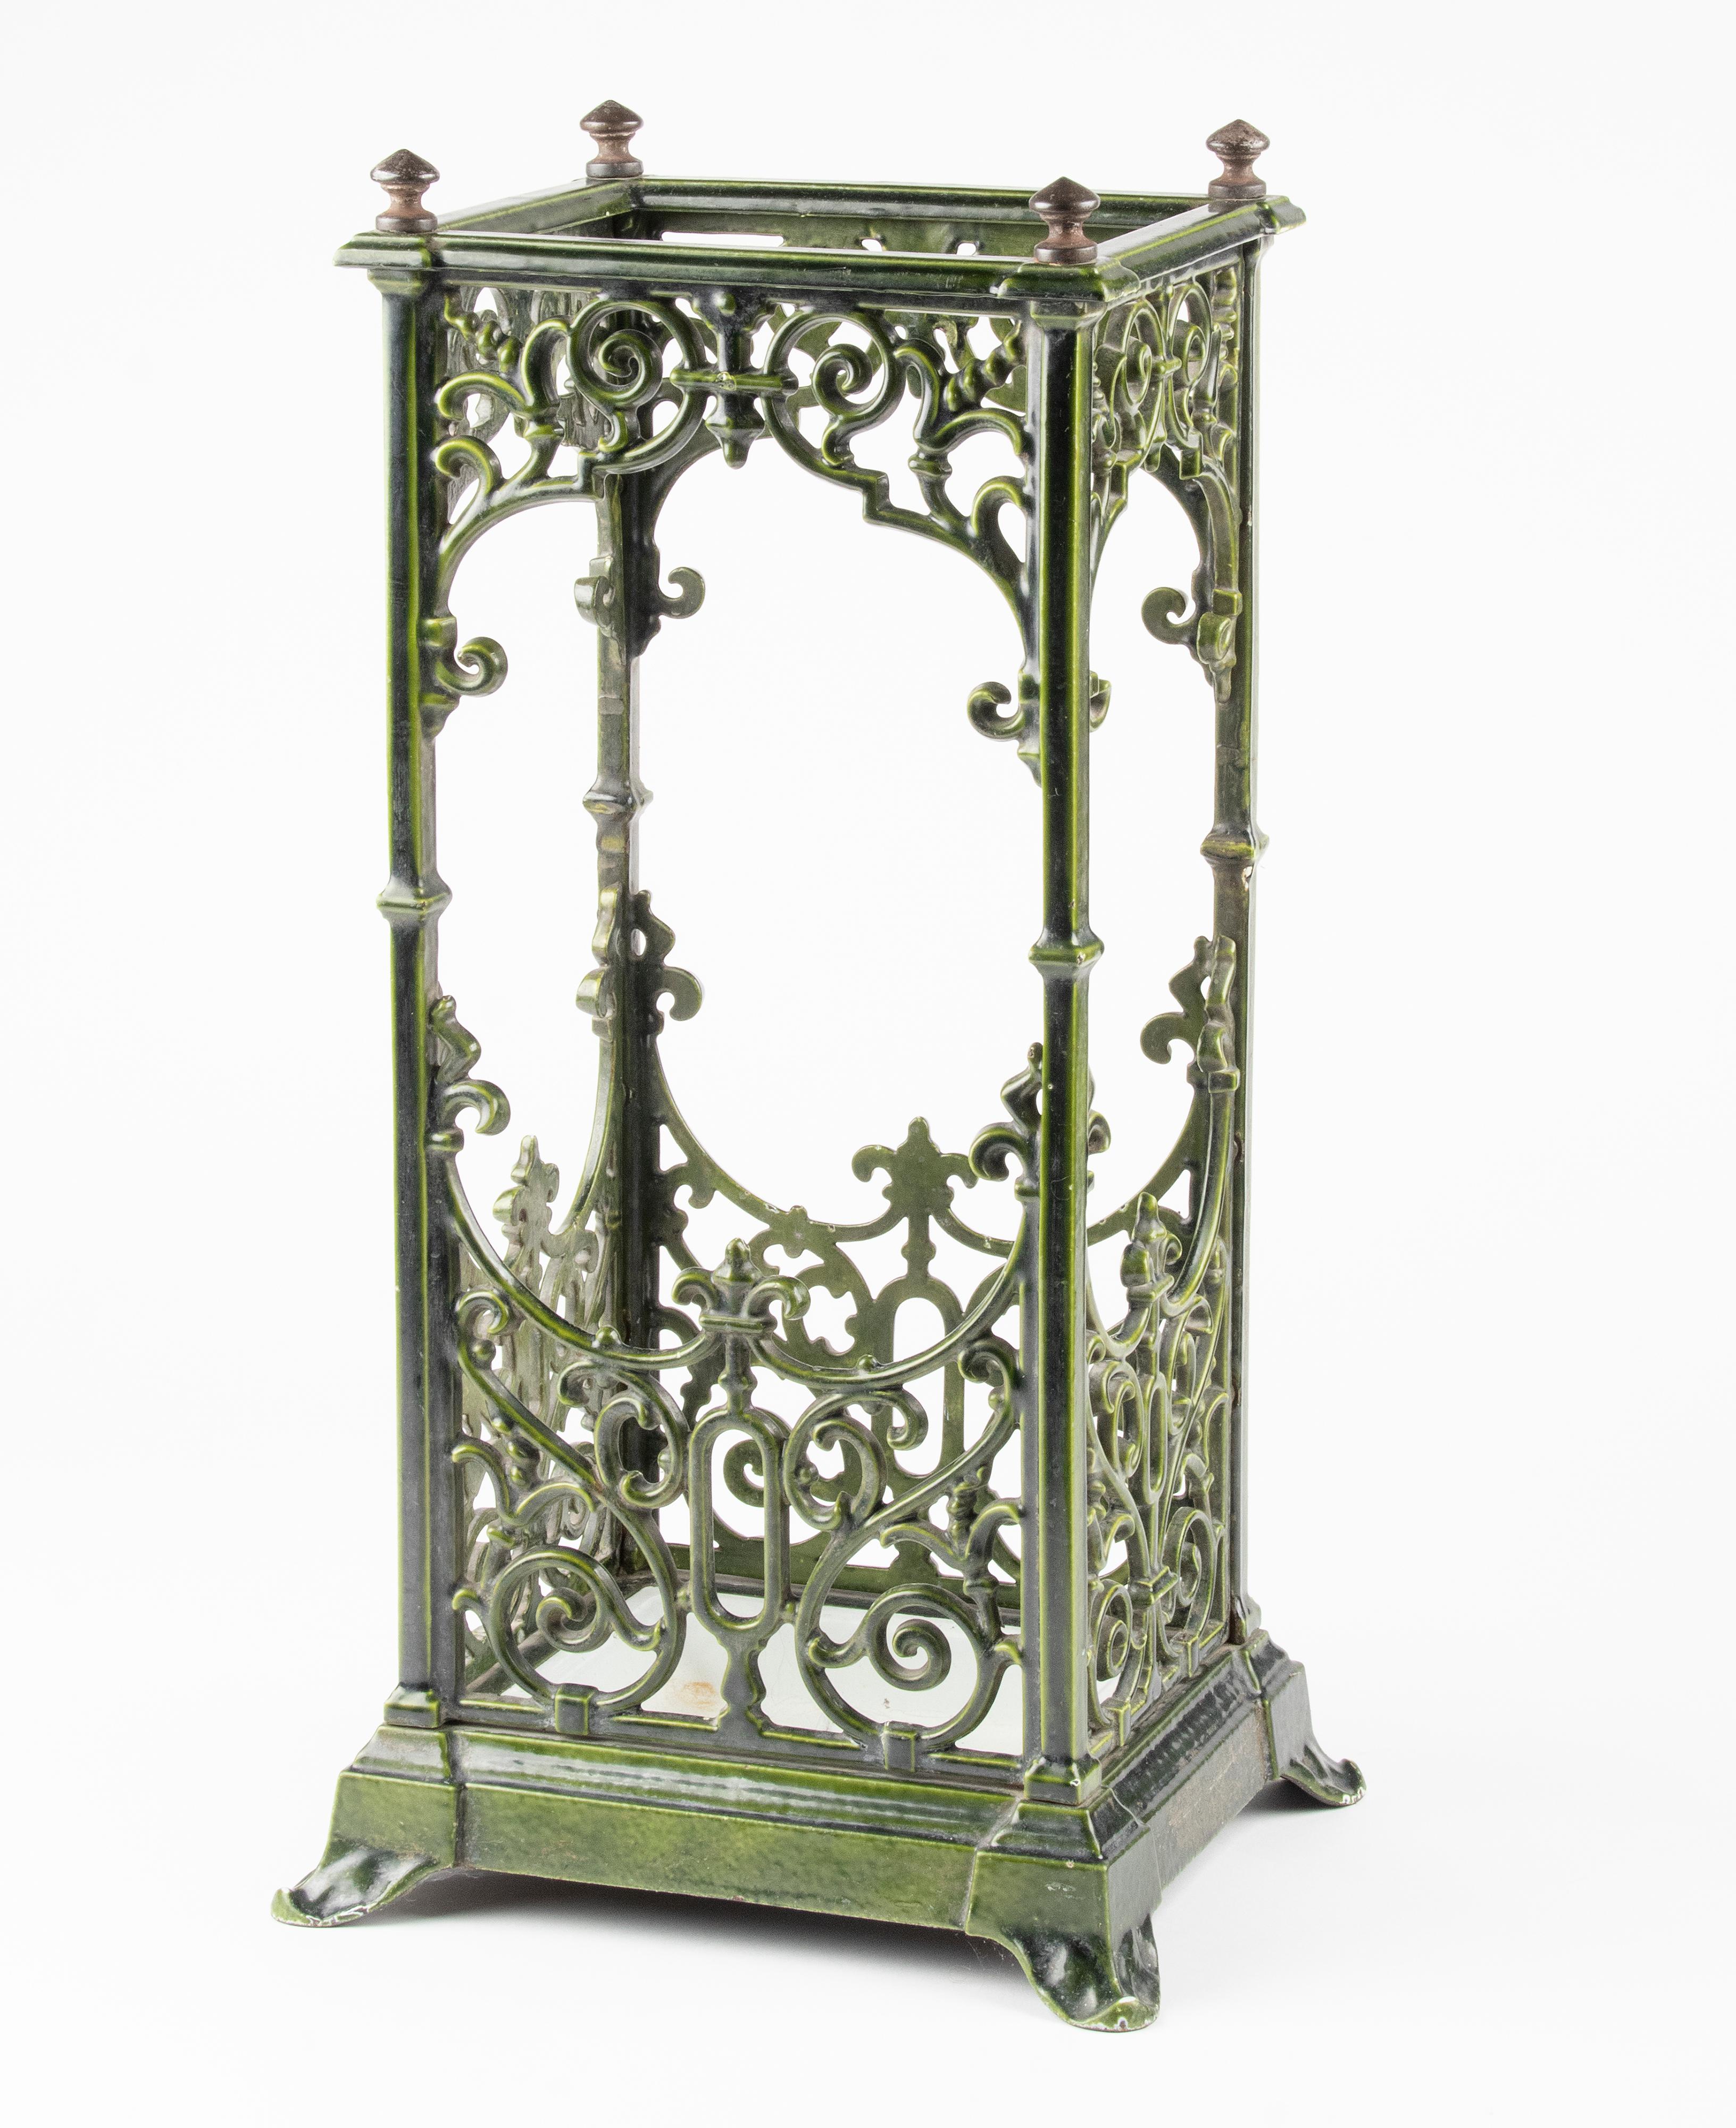 Beautiful antique umbrella stand. Made of heavy cast iron, enamelled in beautiful green color. The white tray at the bottom is removable. The umbrella stand is in very nice condition, with minor signs of age. One small curl ornament is missing, see